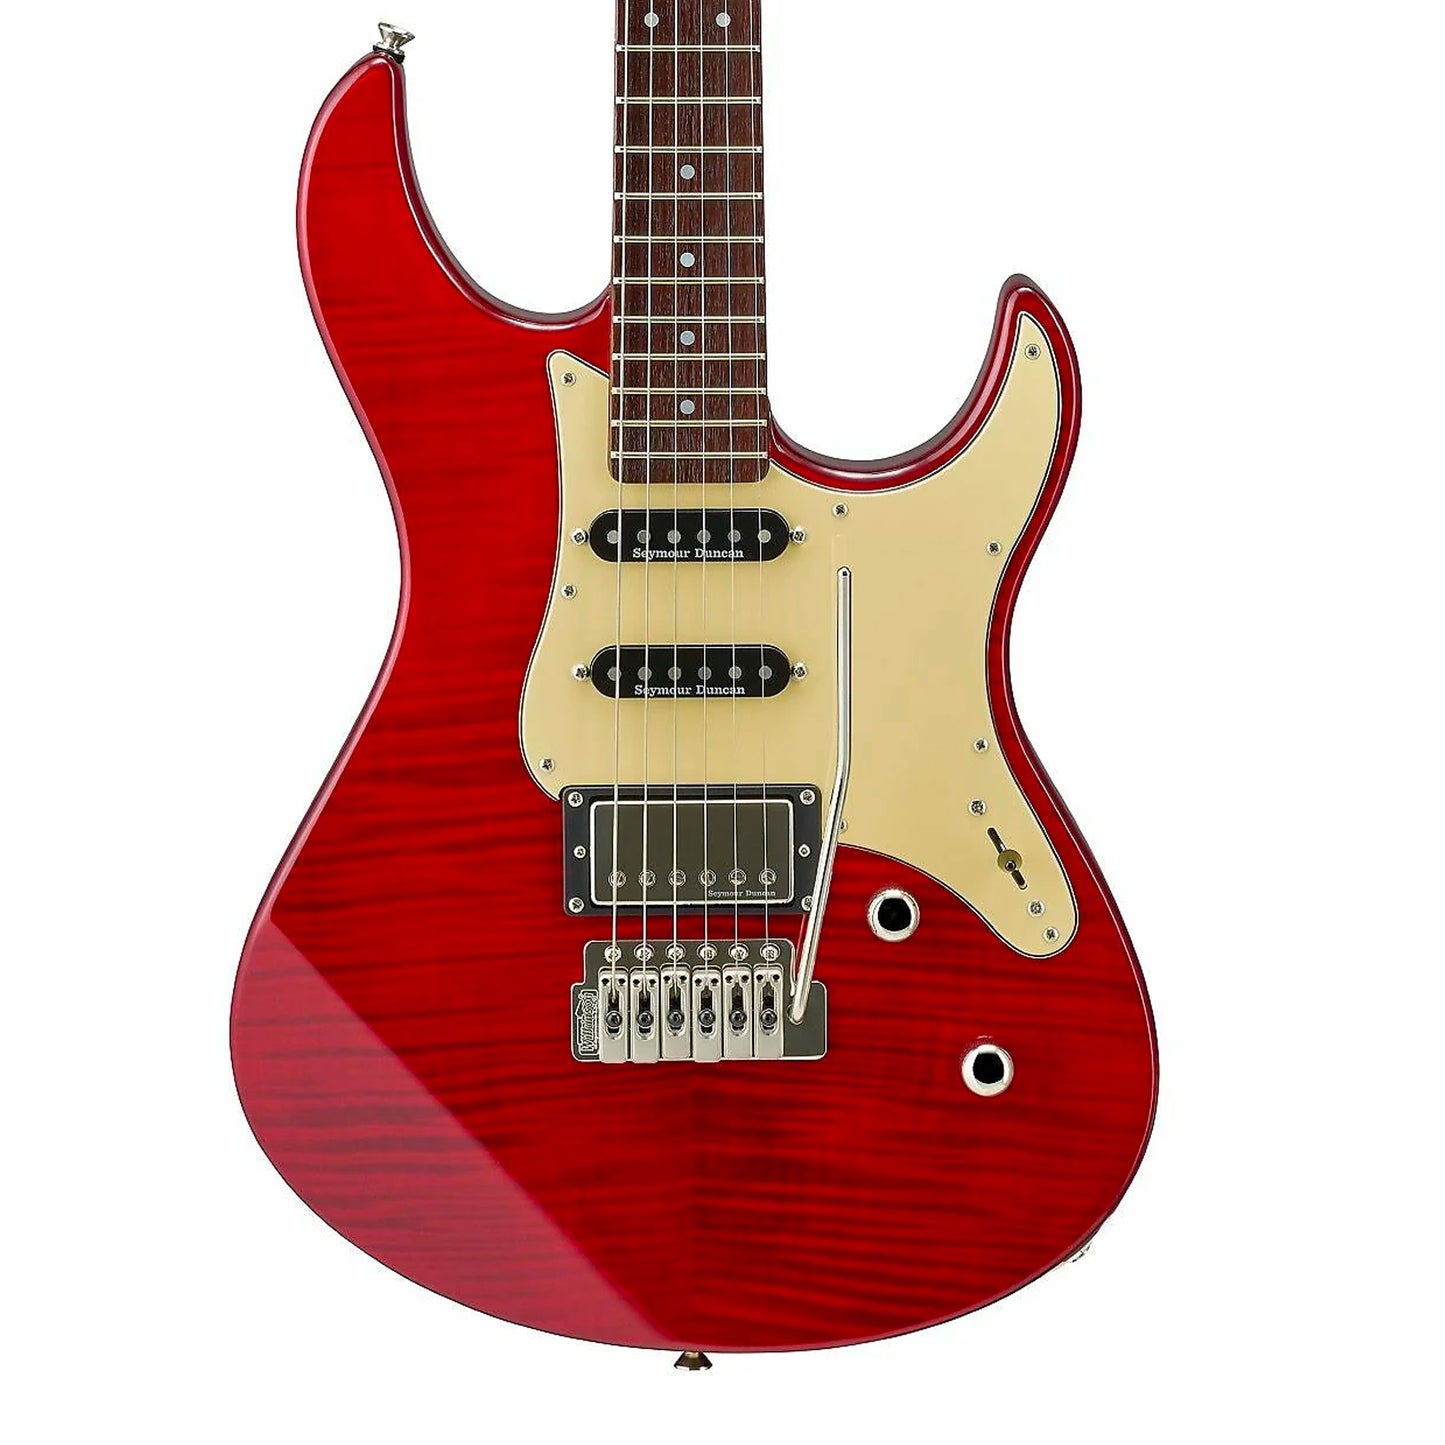 Yamaha PAC612VIIFMX Pacifica - Fired Red